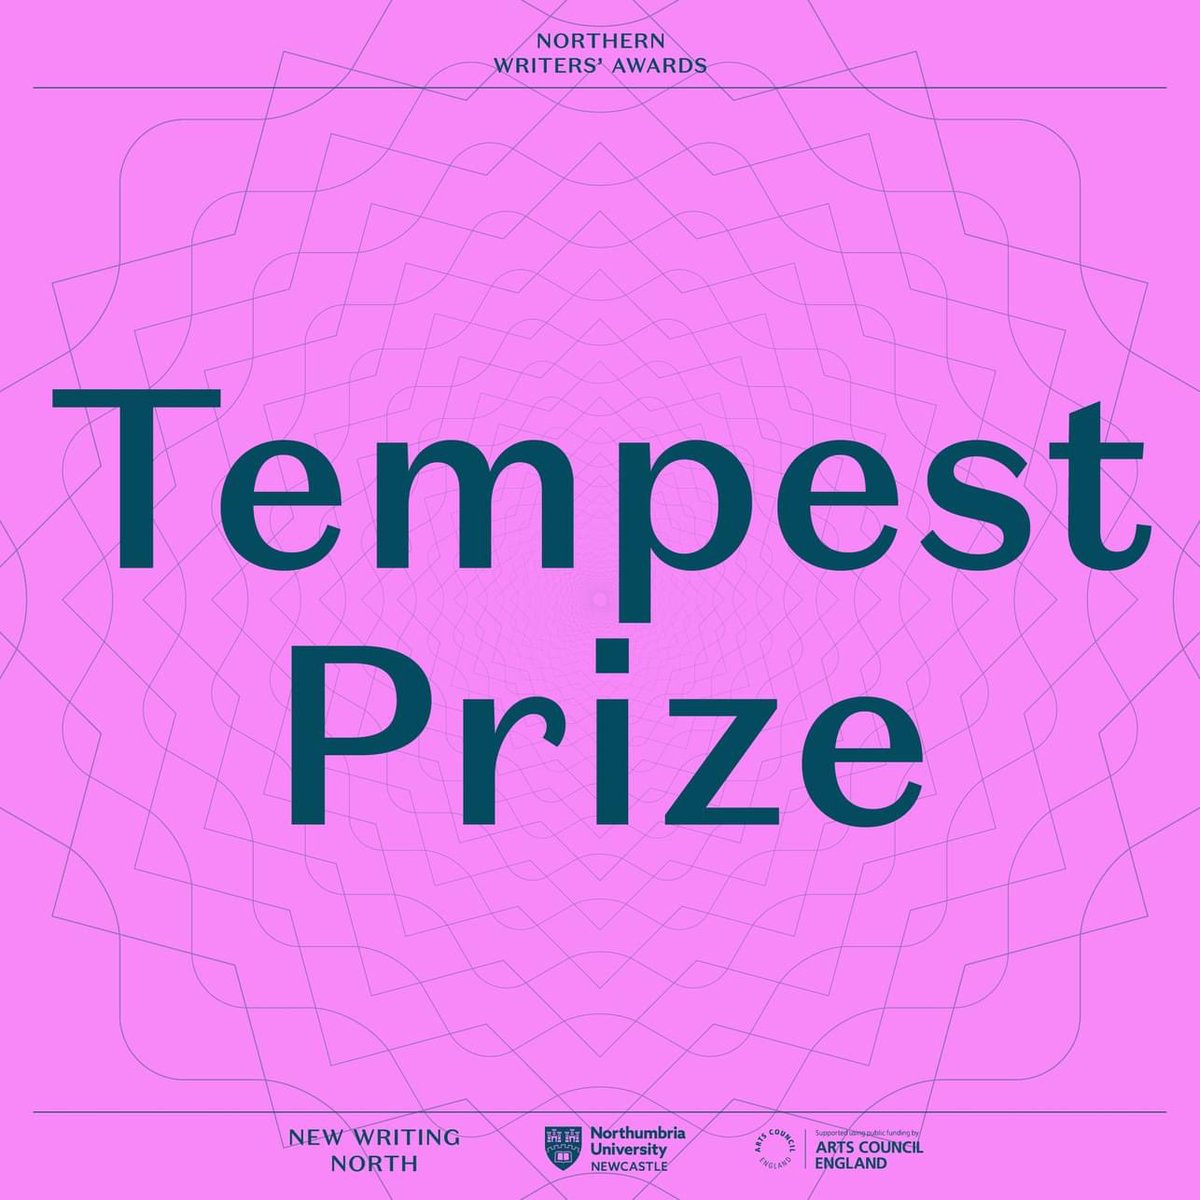 Writers! The Tempest Prize closes for entries at 12pm tomorrow. For unpublished LGBTQ+ writers in the North of England. £1000, mentoring and access to wider New Writing North support. Details here: newwritingnorth.submittable.com/submit/285539/….